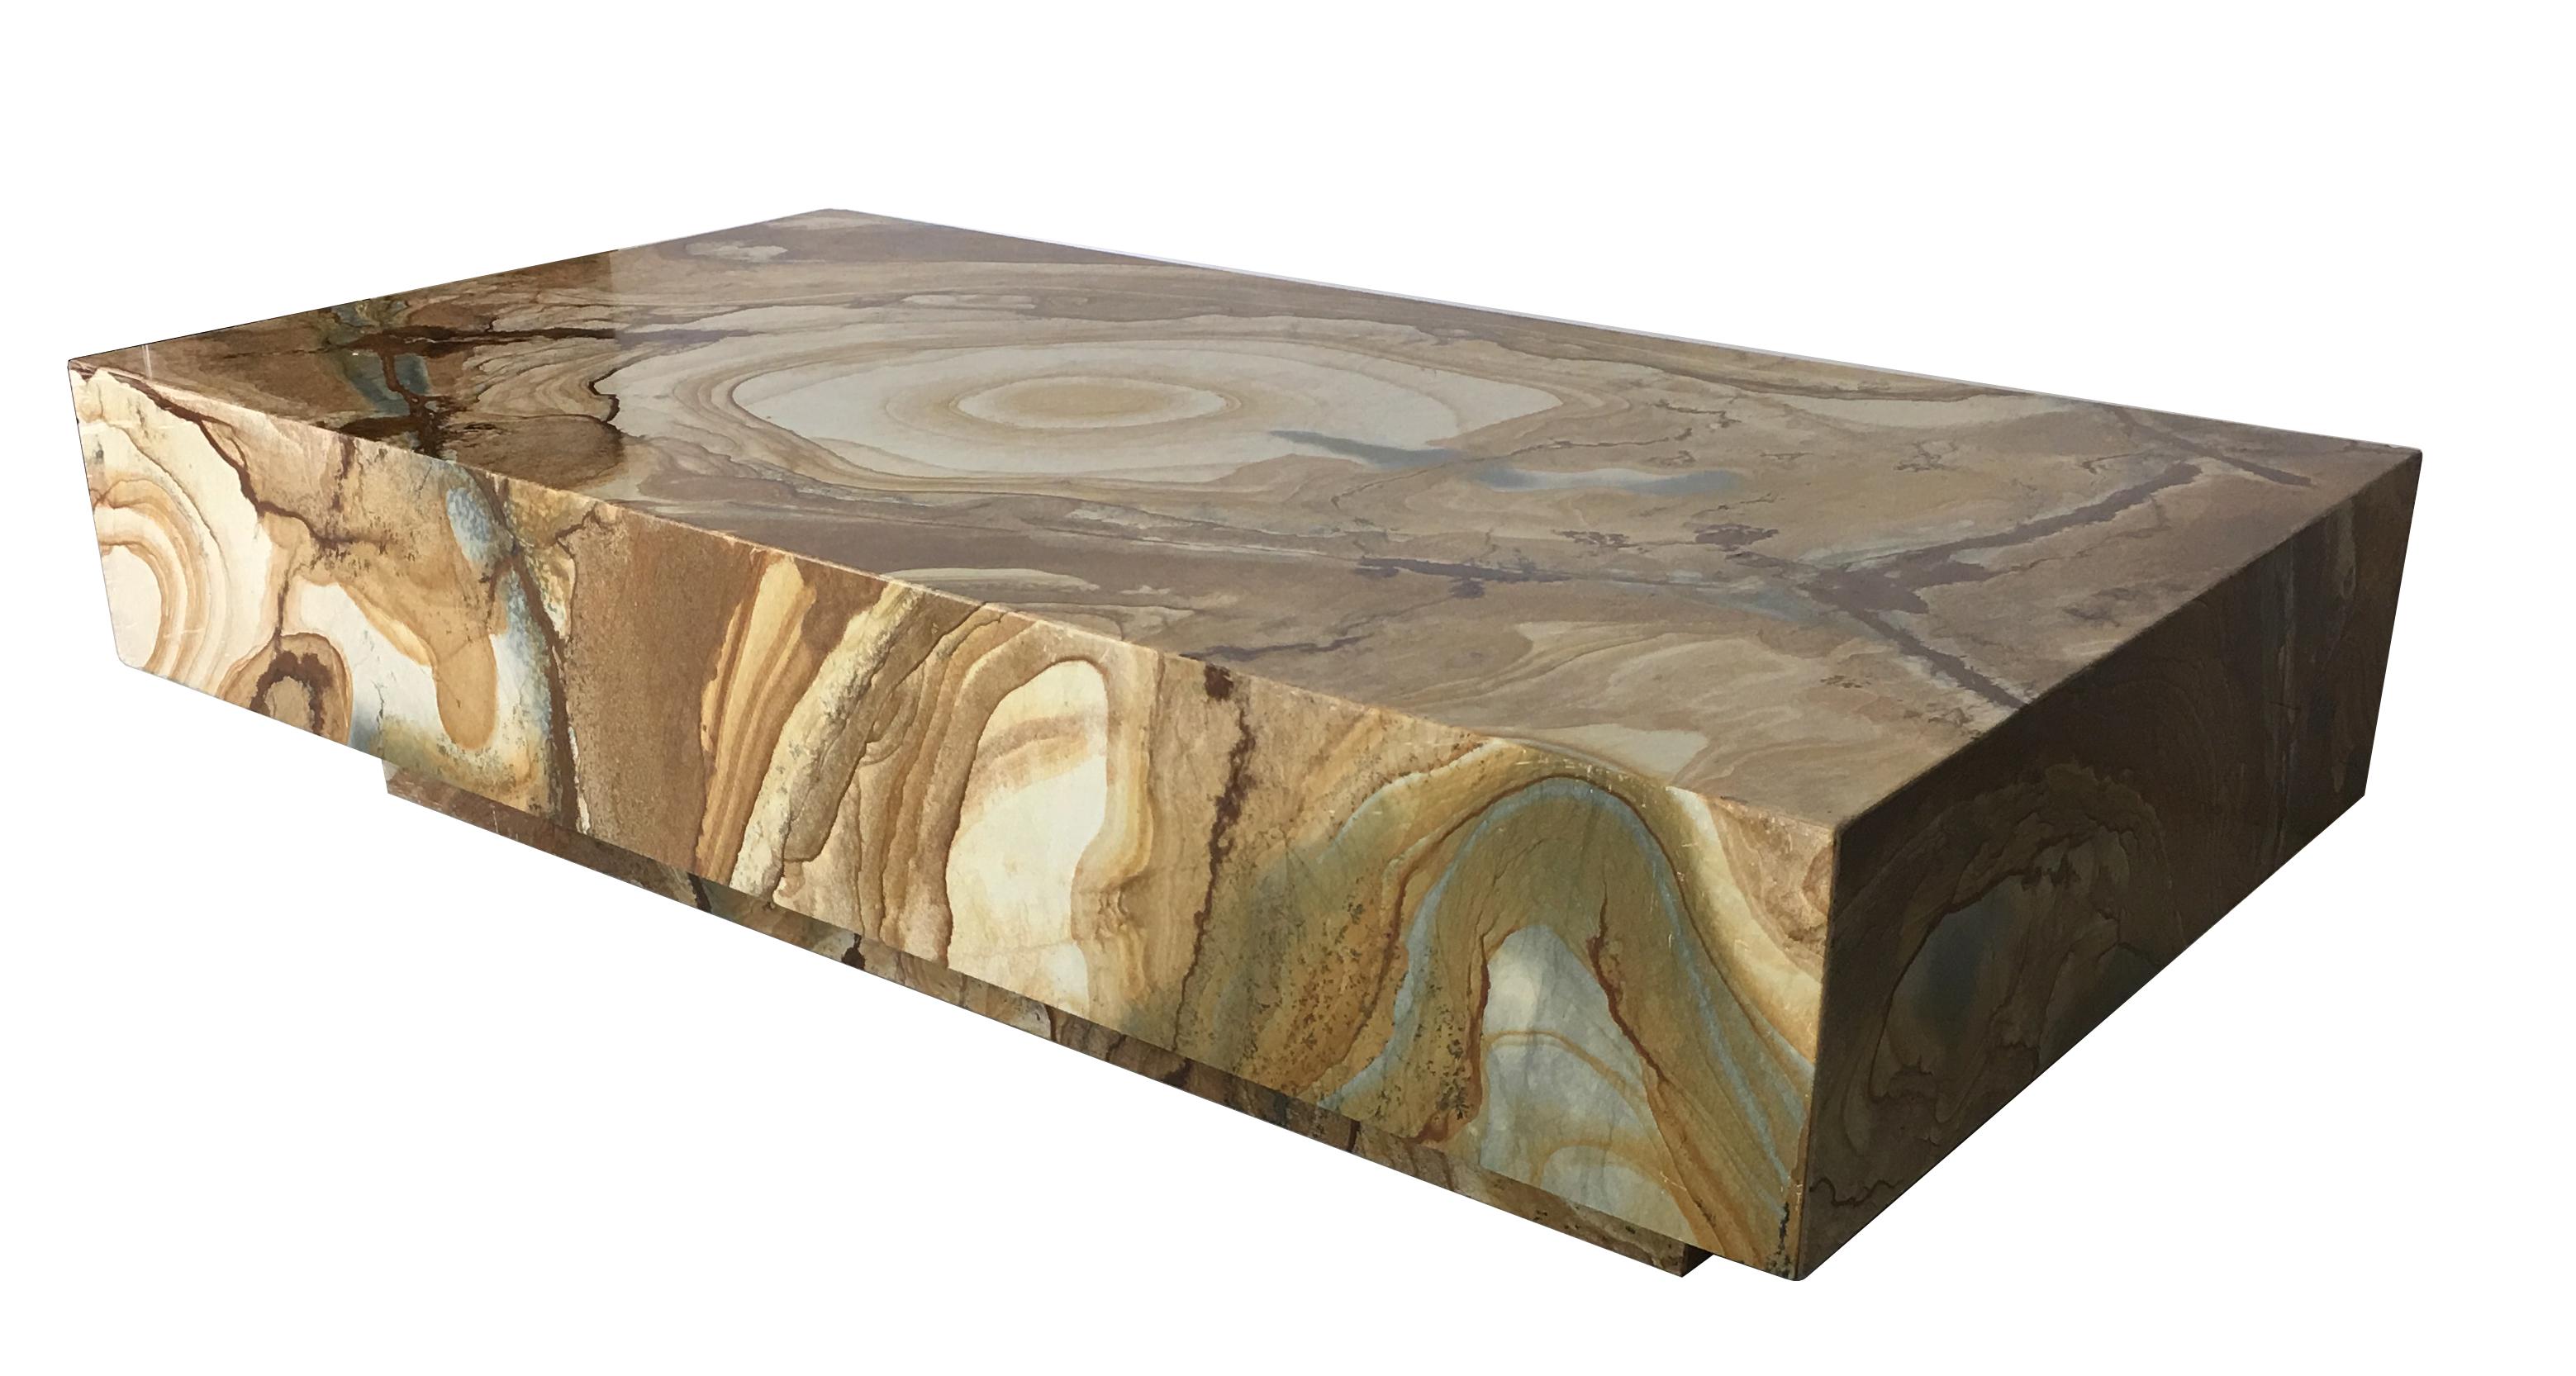 Wildly grained slab form Coffee Table raised on a plinth base.  The  base is recessed, giving the table the virtual look of floating.  The overall height can be adjusted from 12” to 16” with the use of wood shims.